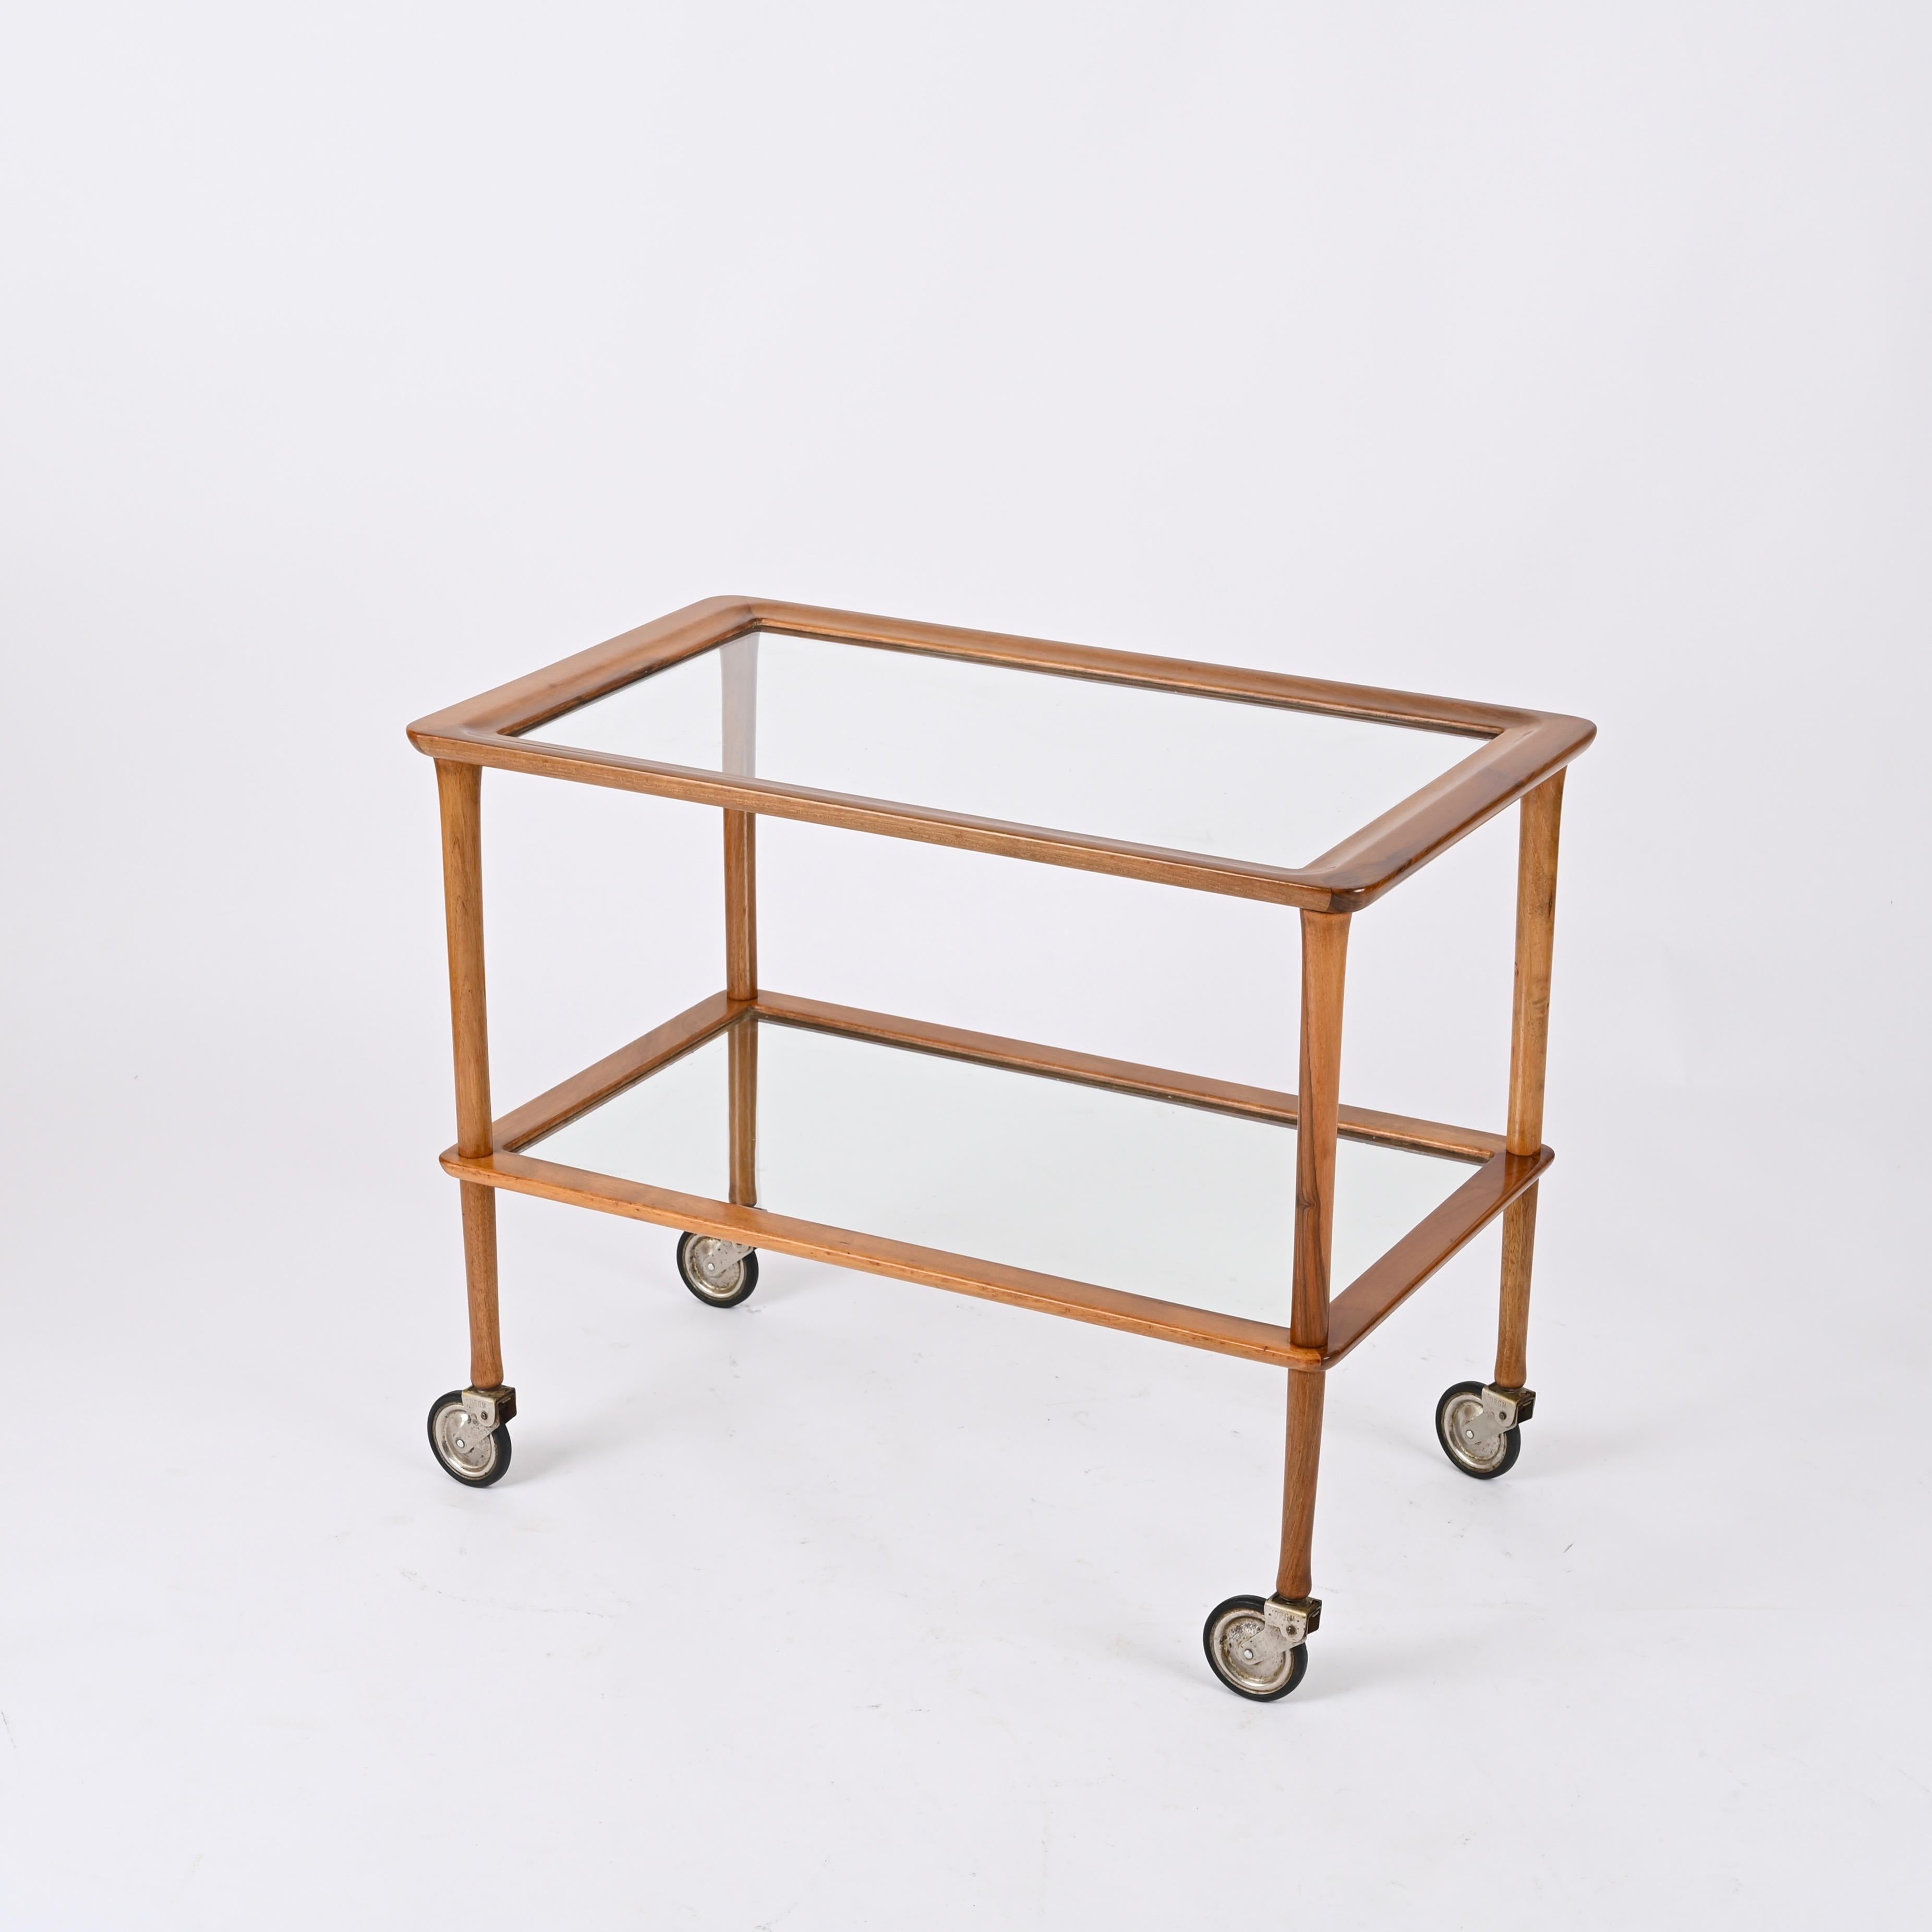 Midcentury Italian Bar Cart in Walnut and Glass, Cesare Lacca, Italy, 1960s For Sale 2